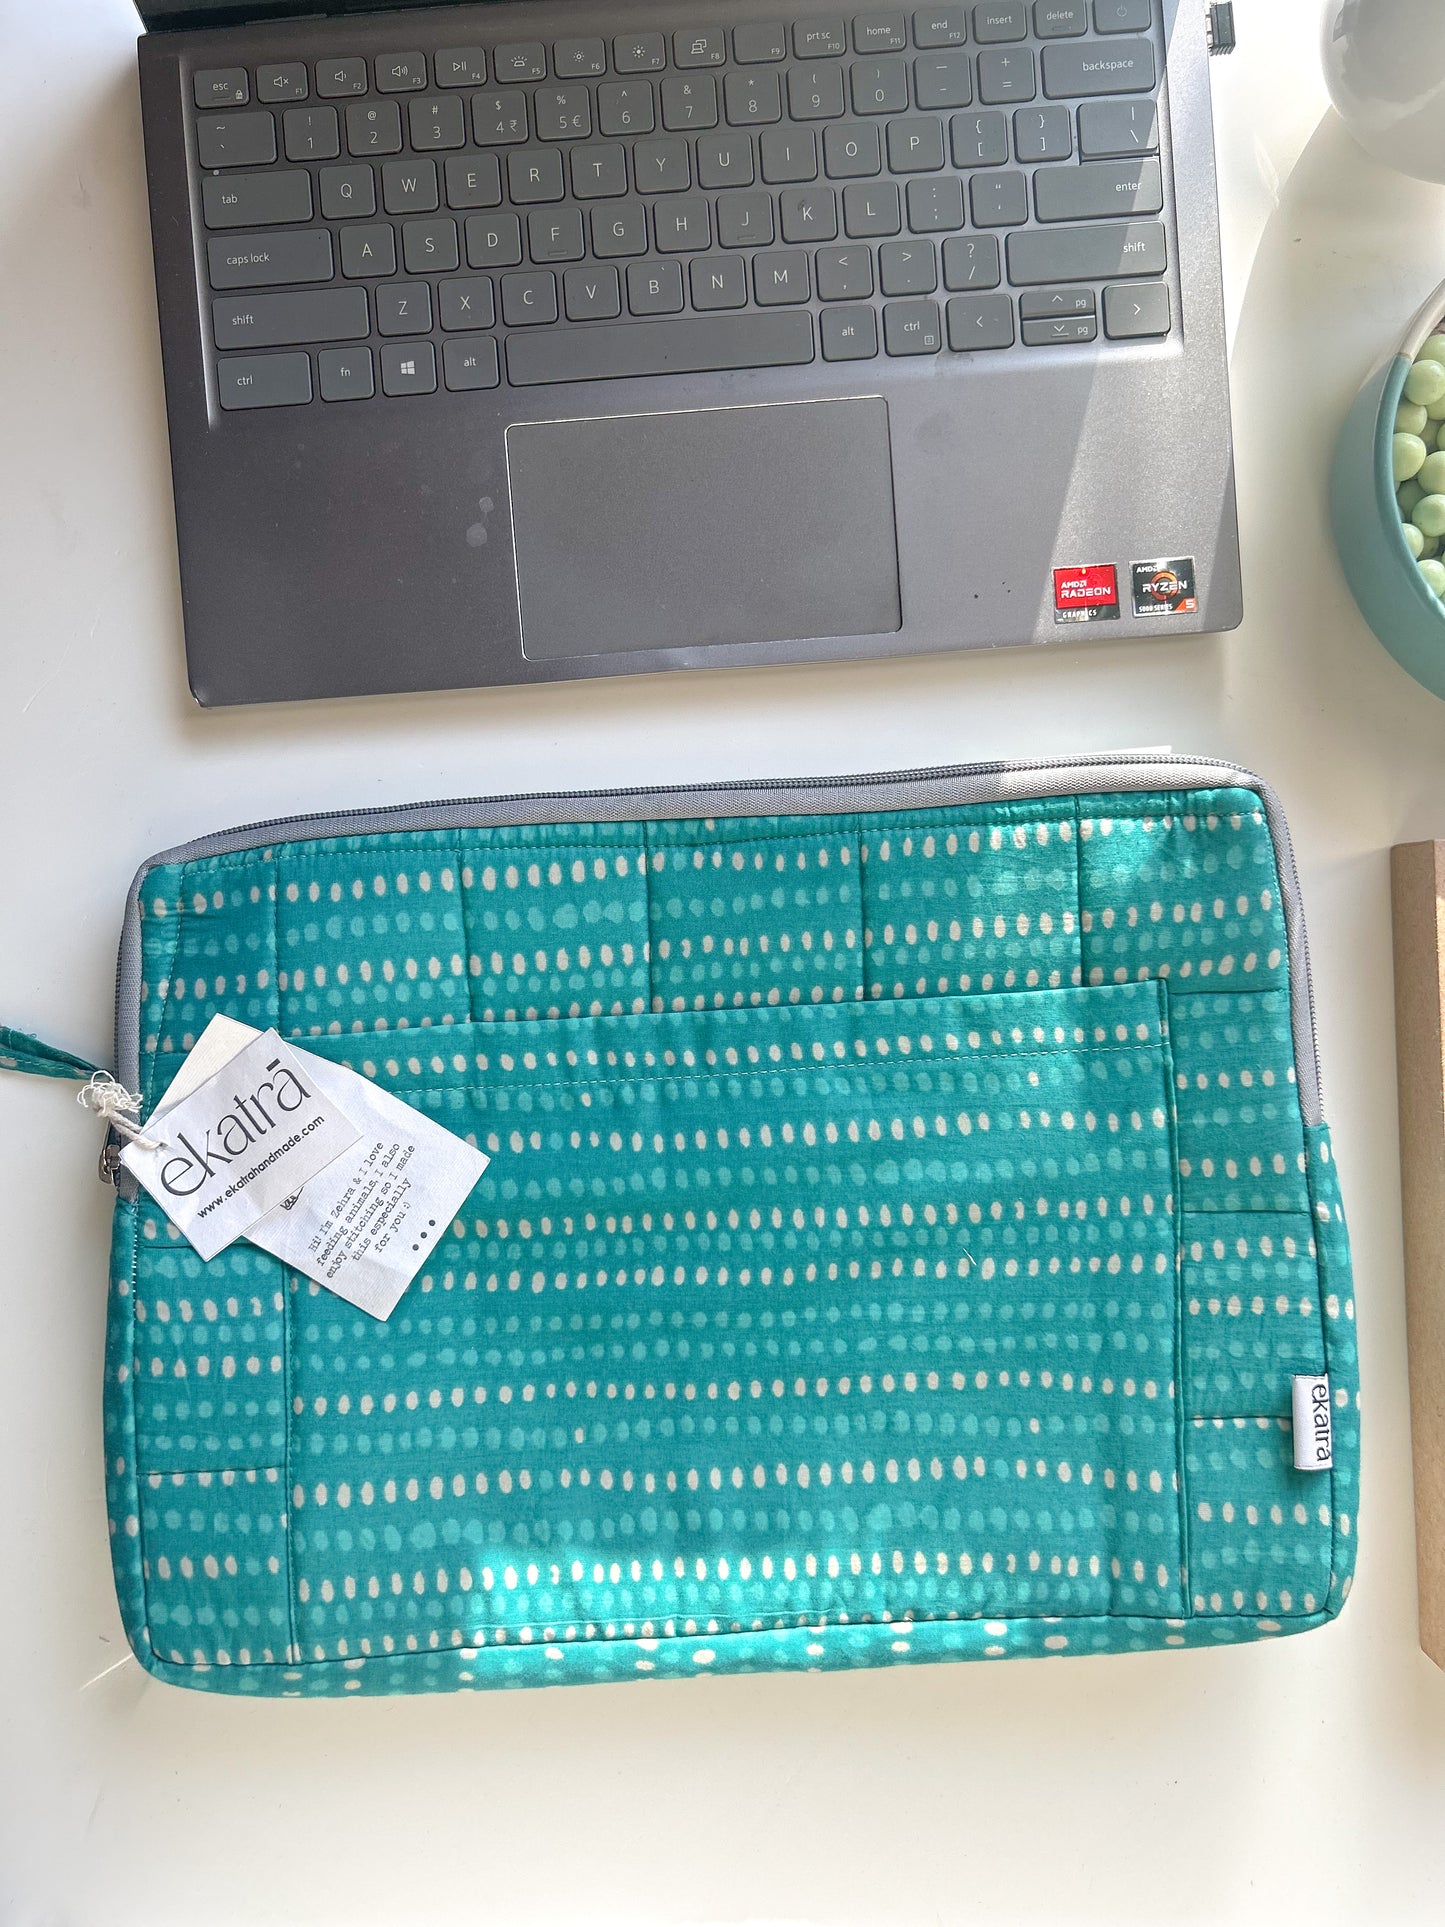 Sustainable Handmade Cotton Laptop Sleeve/Laptop Cover by Ekatra - Teal dots